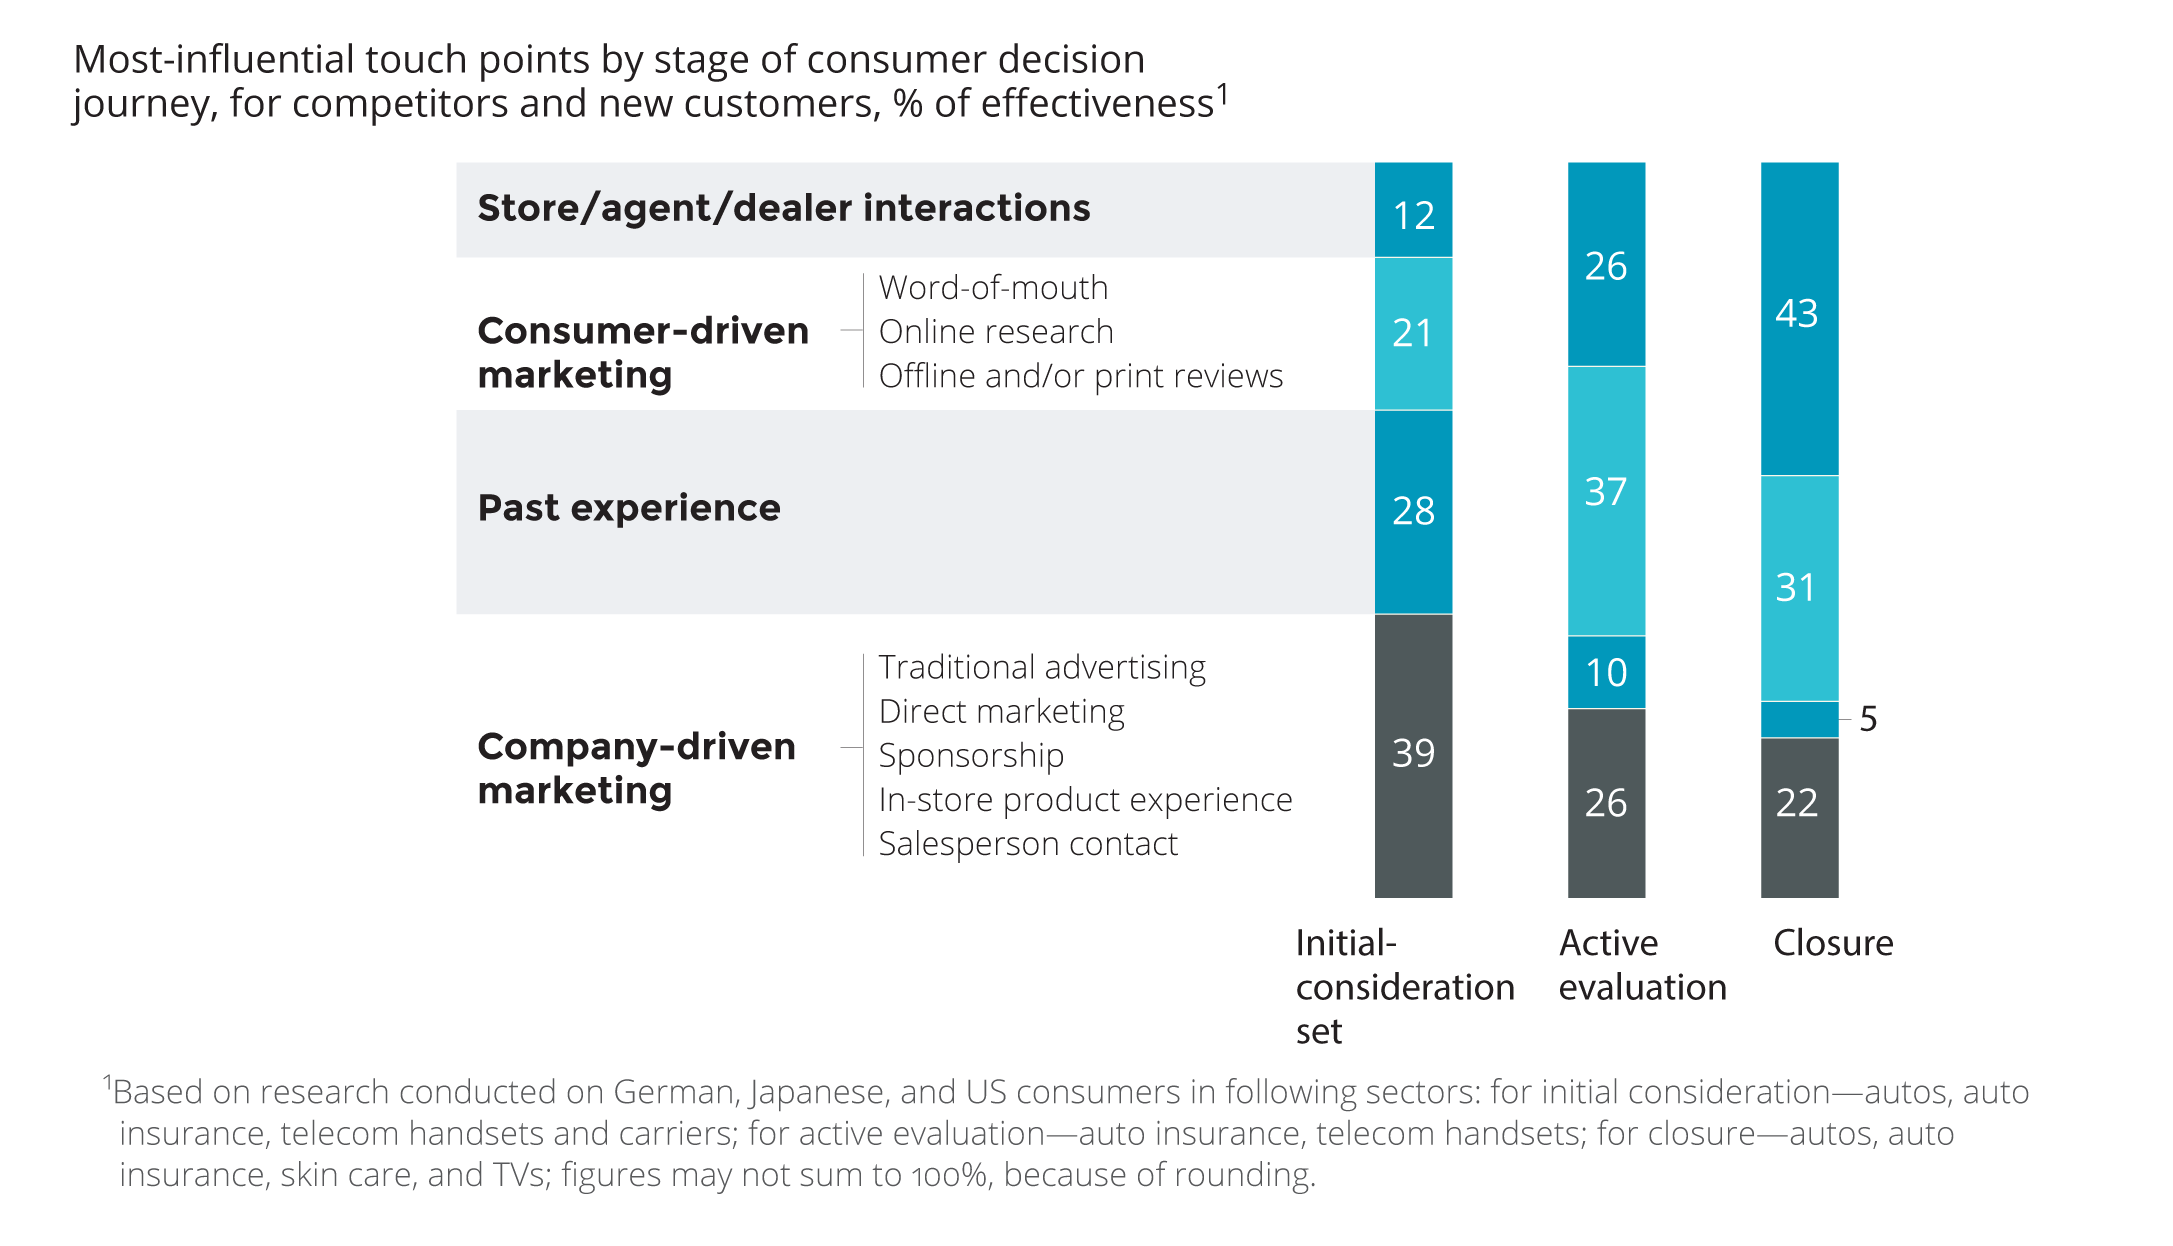 Most-influential touch points by stage of consumer decision journey, for competitors and new customers, % of effectiveness